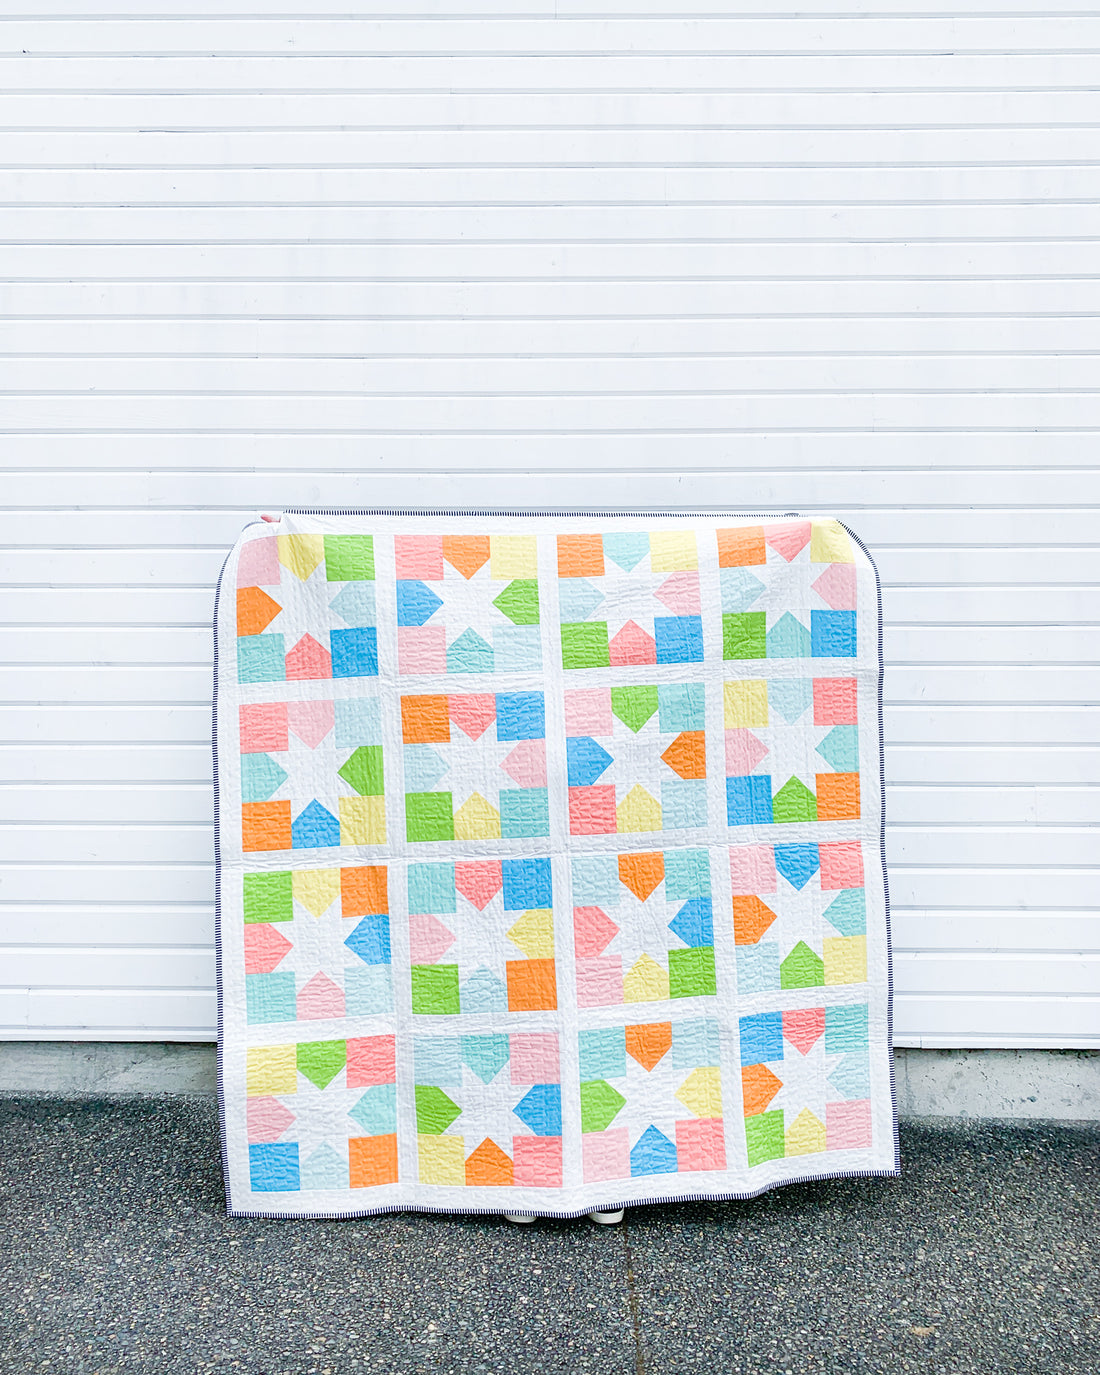 Joyful Stars - Scrappy Bella Solids (and testers quilts!)